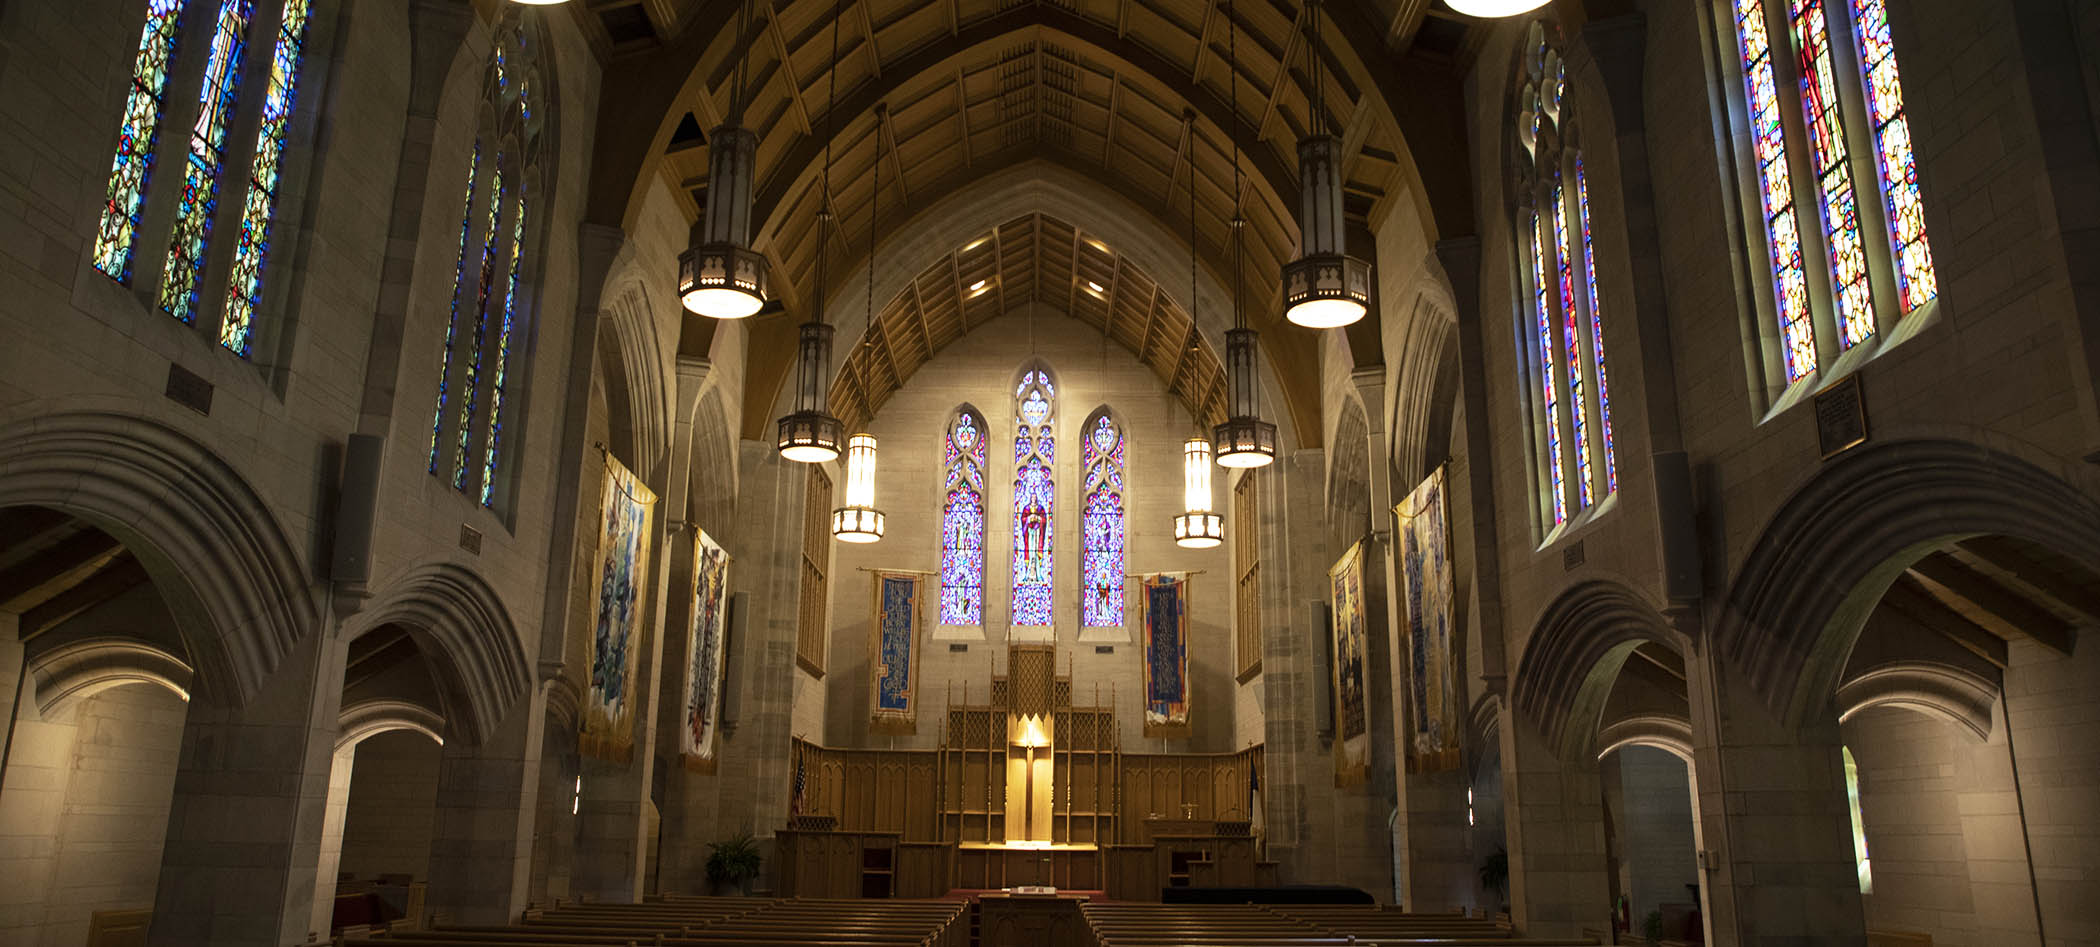 Williams Memorial Chapel Interior with Stained Glass